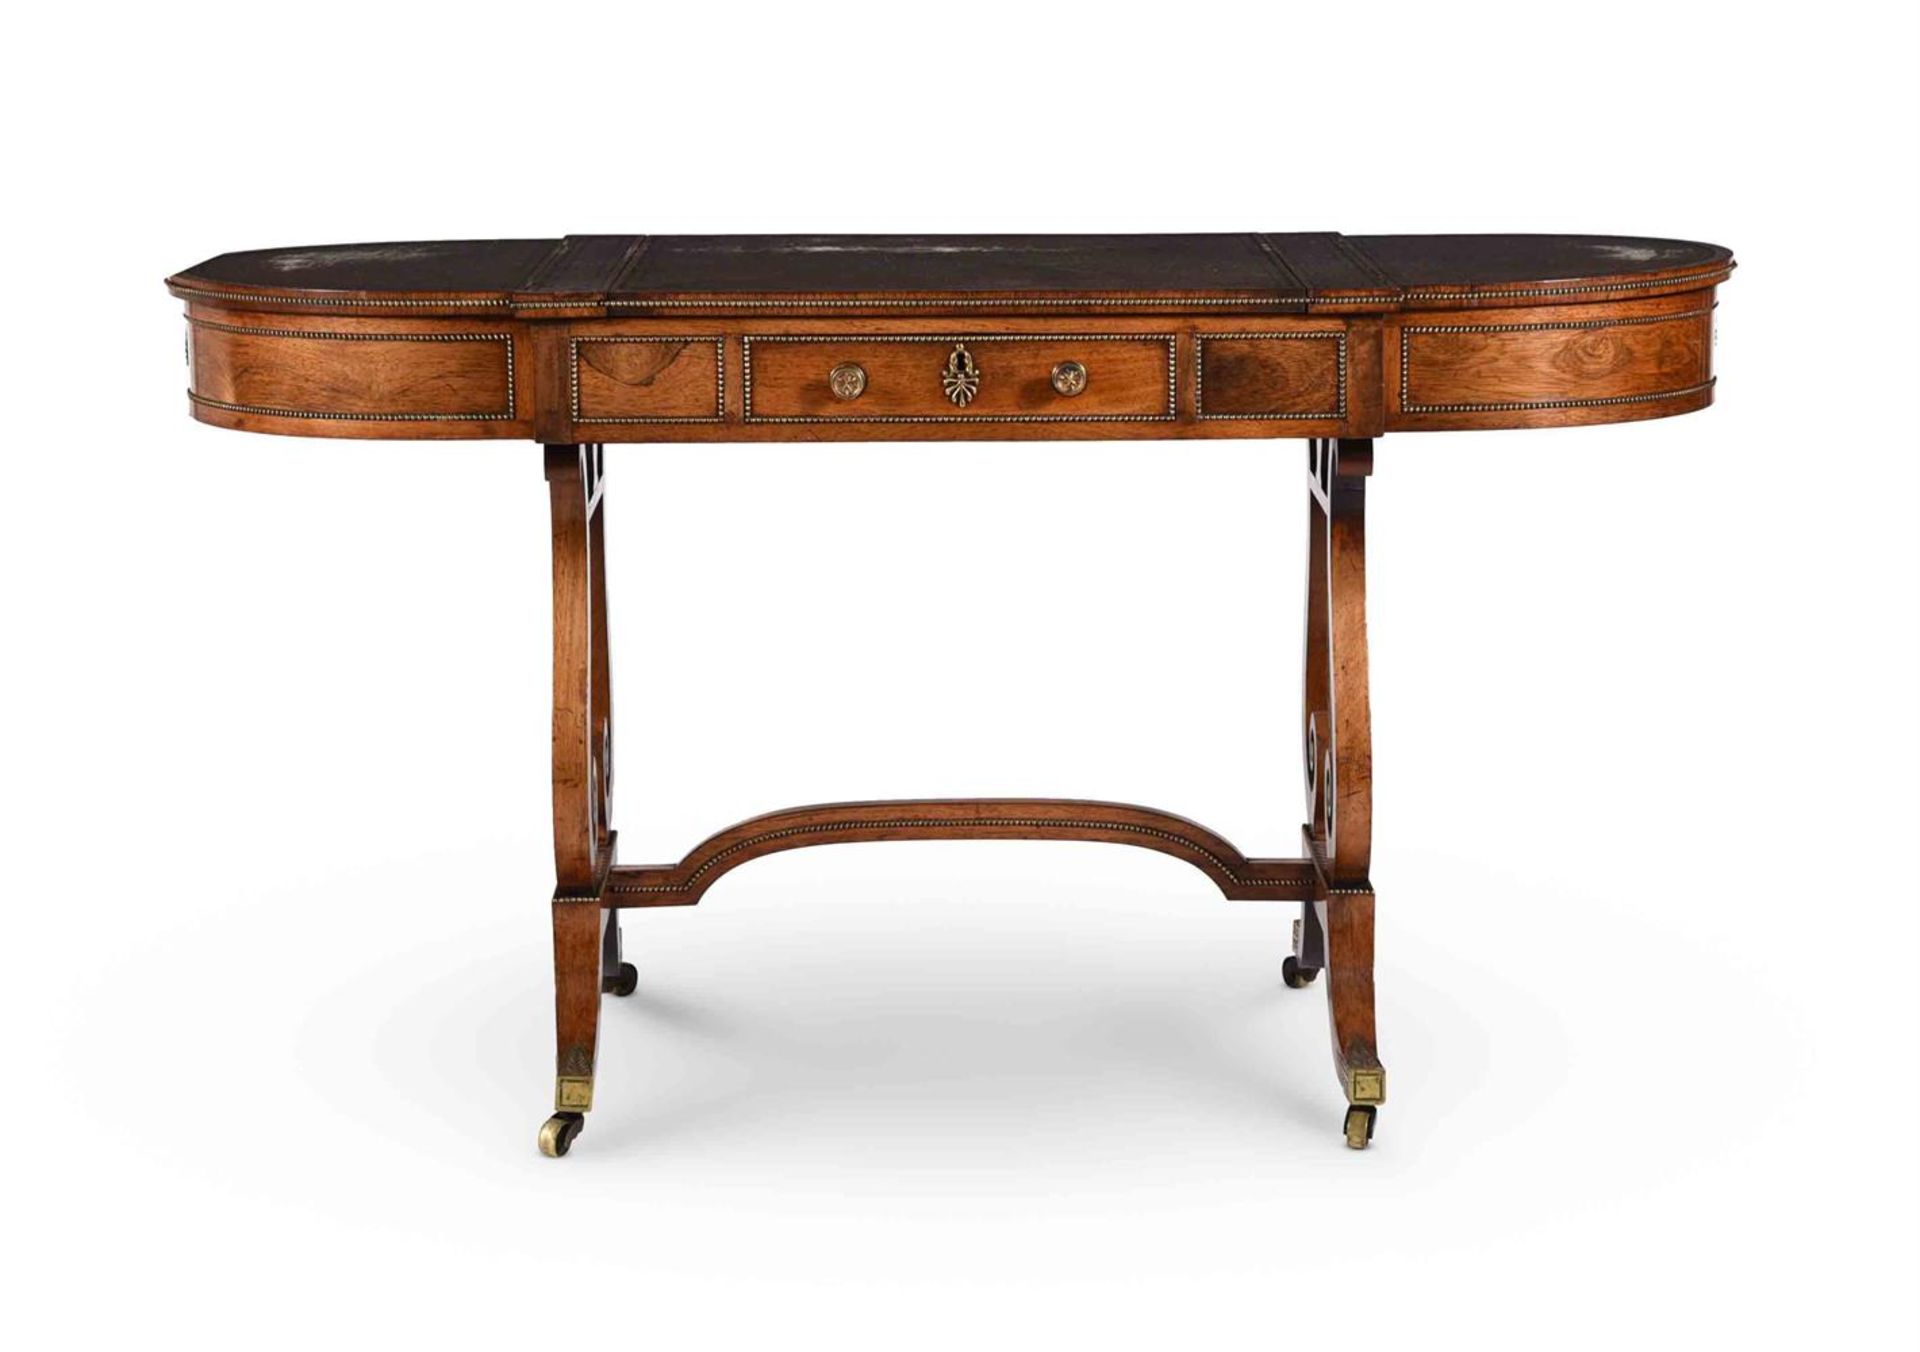 Y A REGENCY ROSEWOOD AND GILT METAL MOUNTED WRITING AND GAMES TABLE, ATTRIBUTED TO GILLOWS - Image 2 of 10